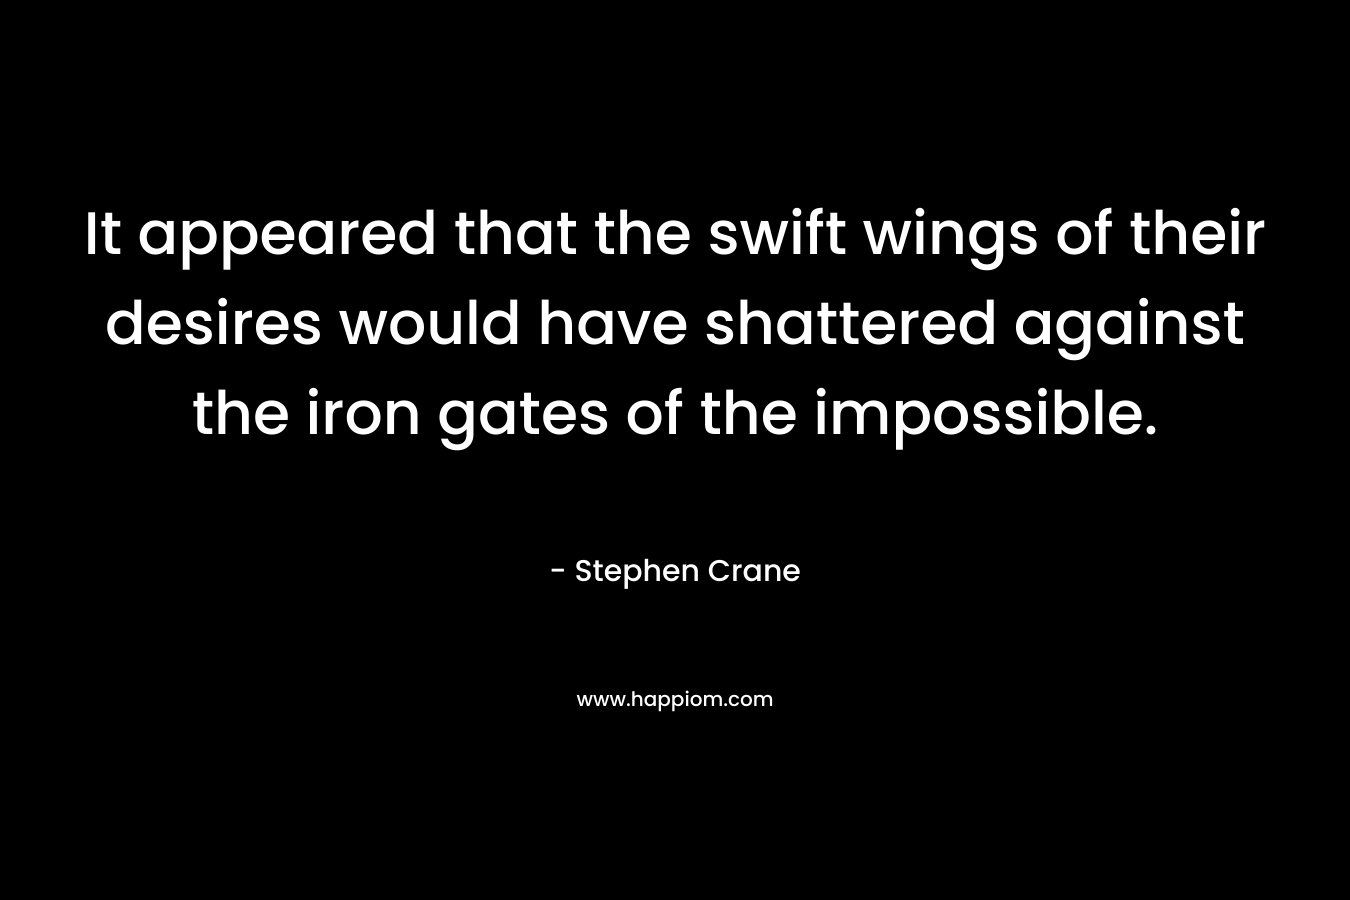 It appeared that the swift wings of their desires would have shattered against the iron gates of the impossible.